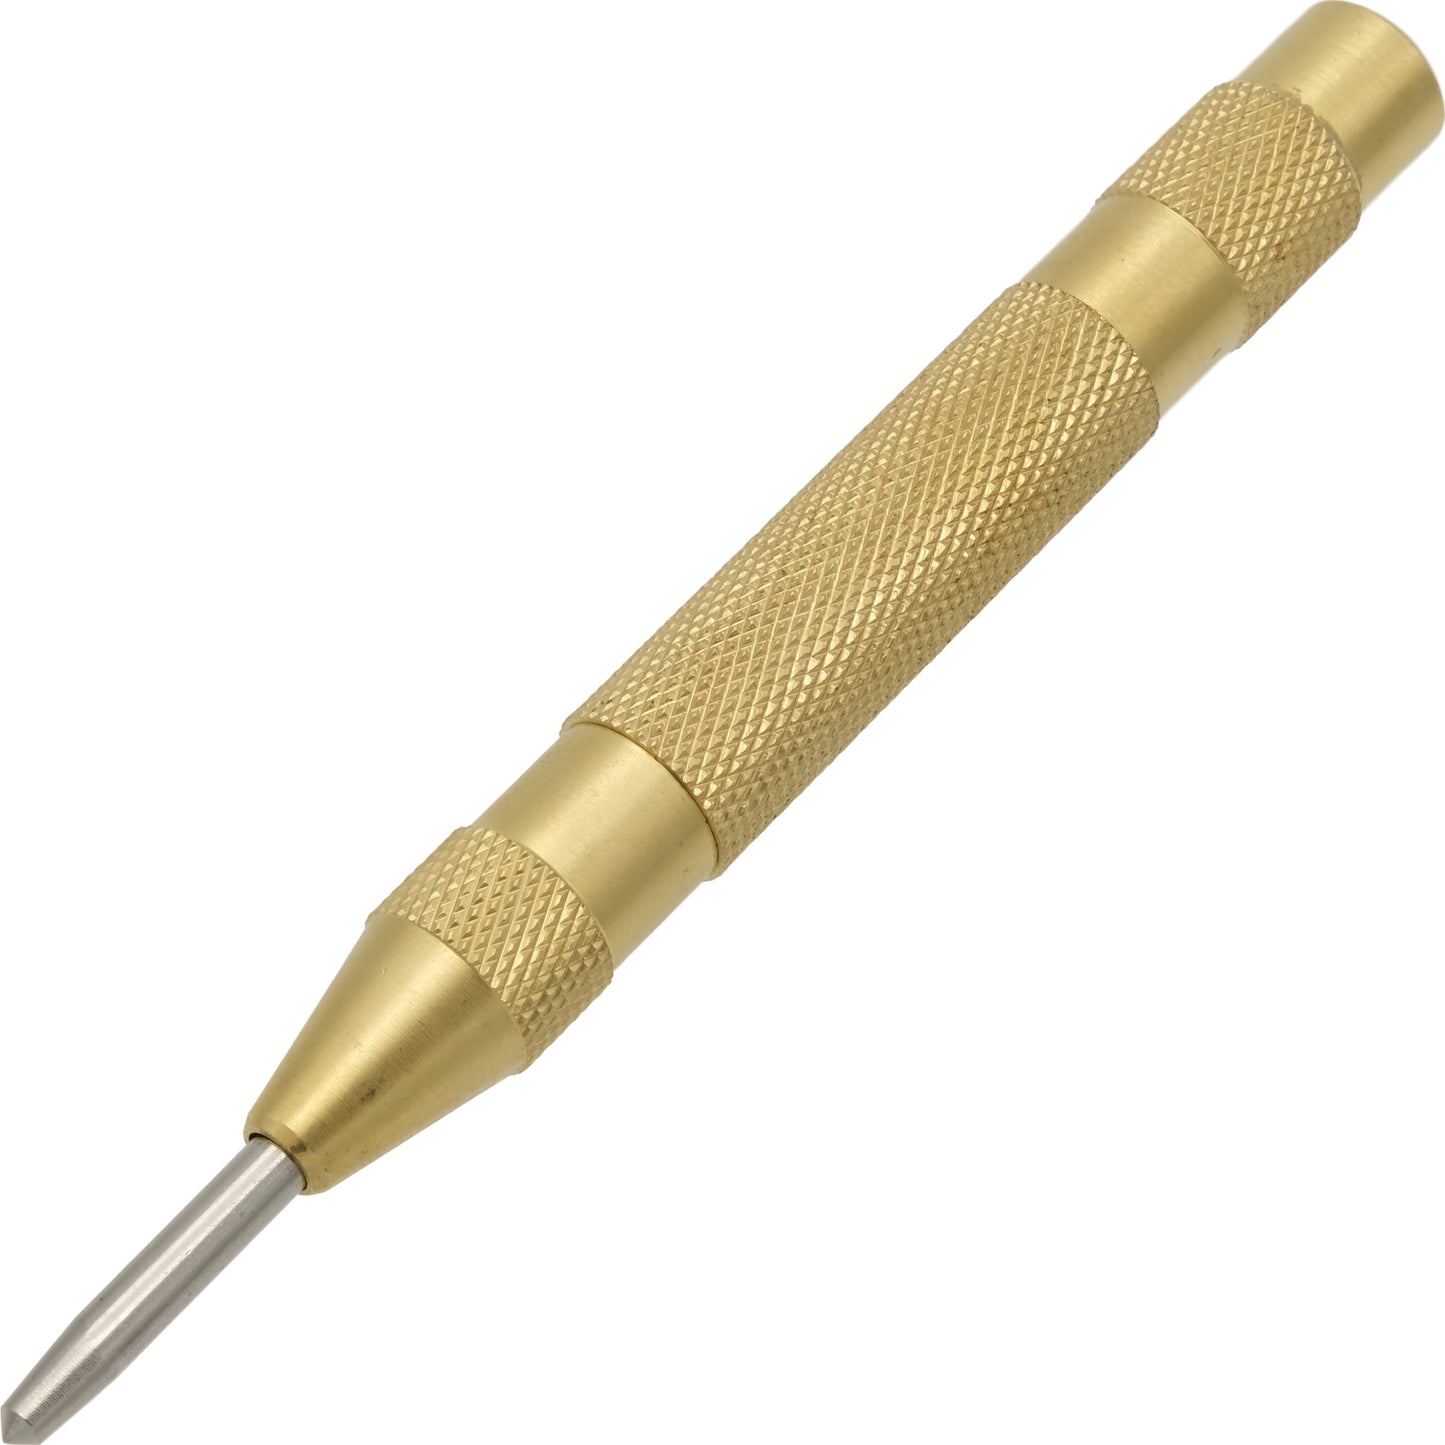 Carbide Pen Scriber Jewelry Repair Tool & Automatic Marking Center Punch